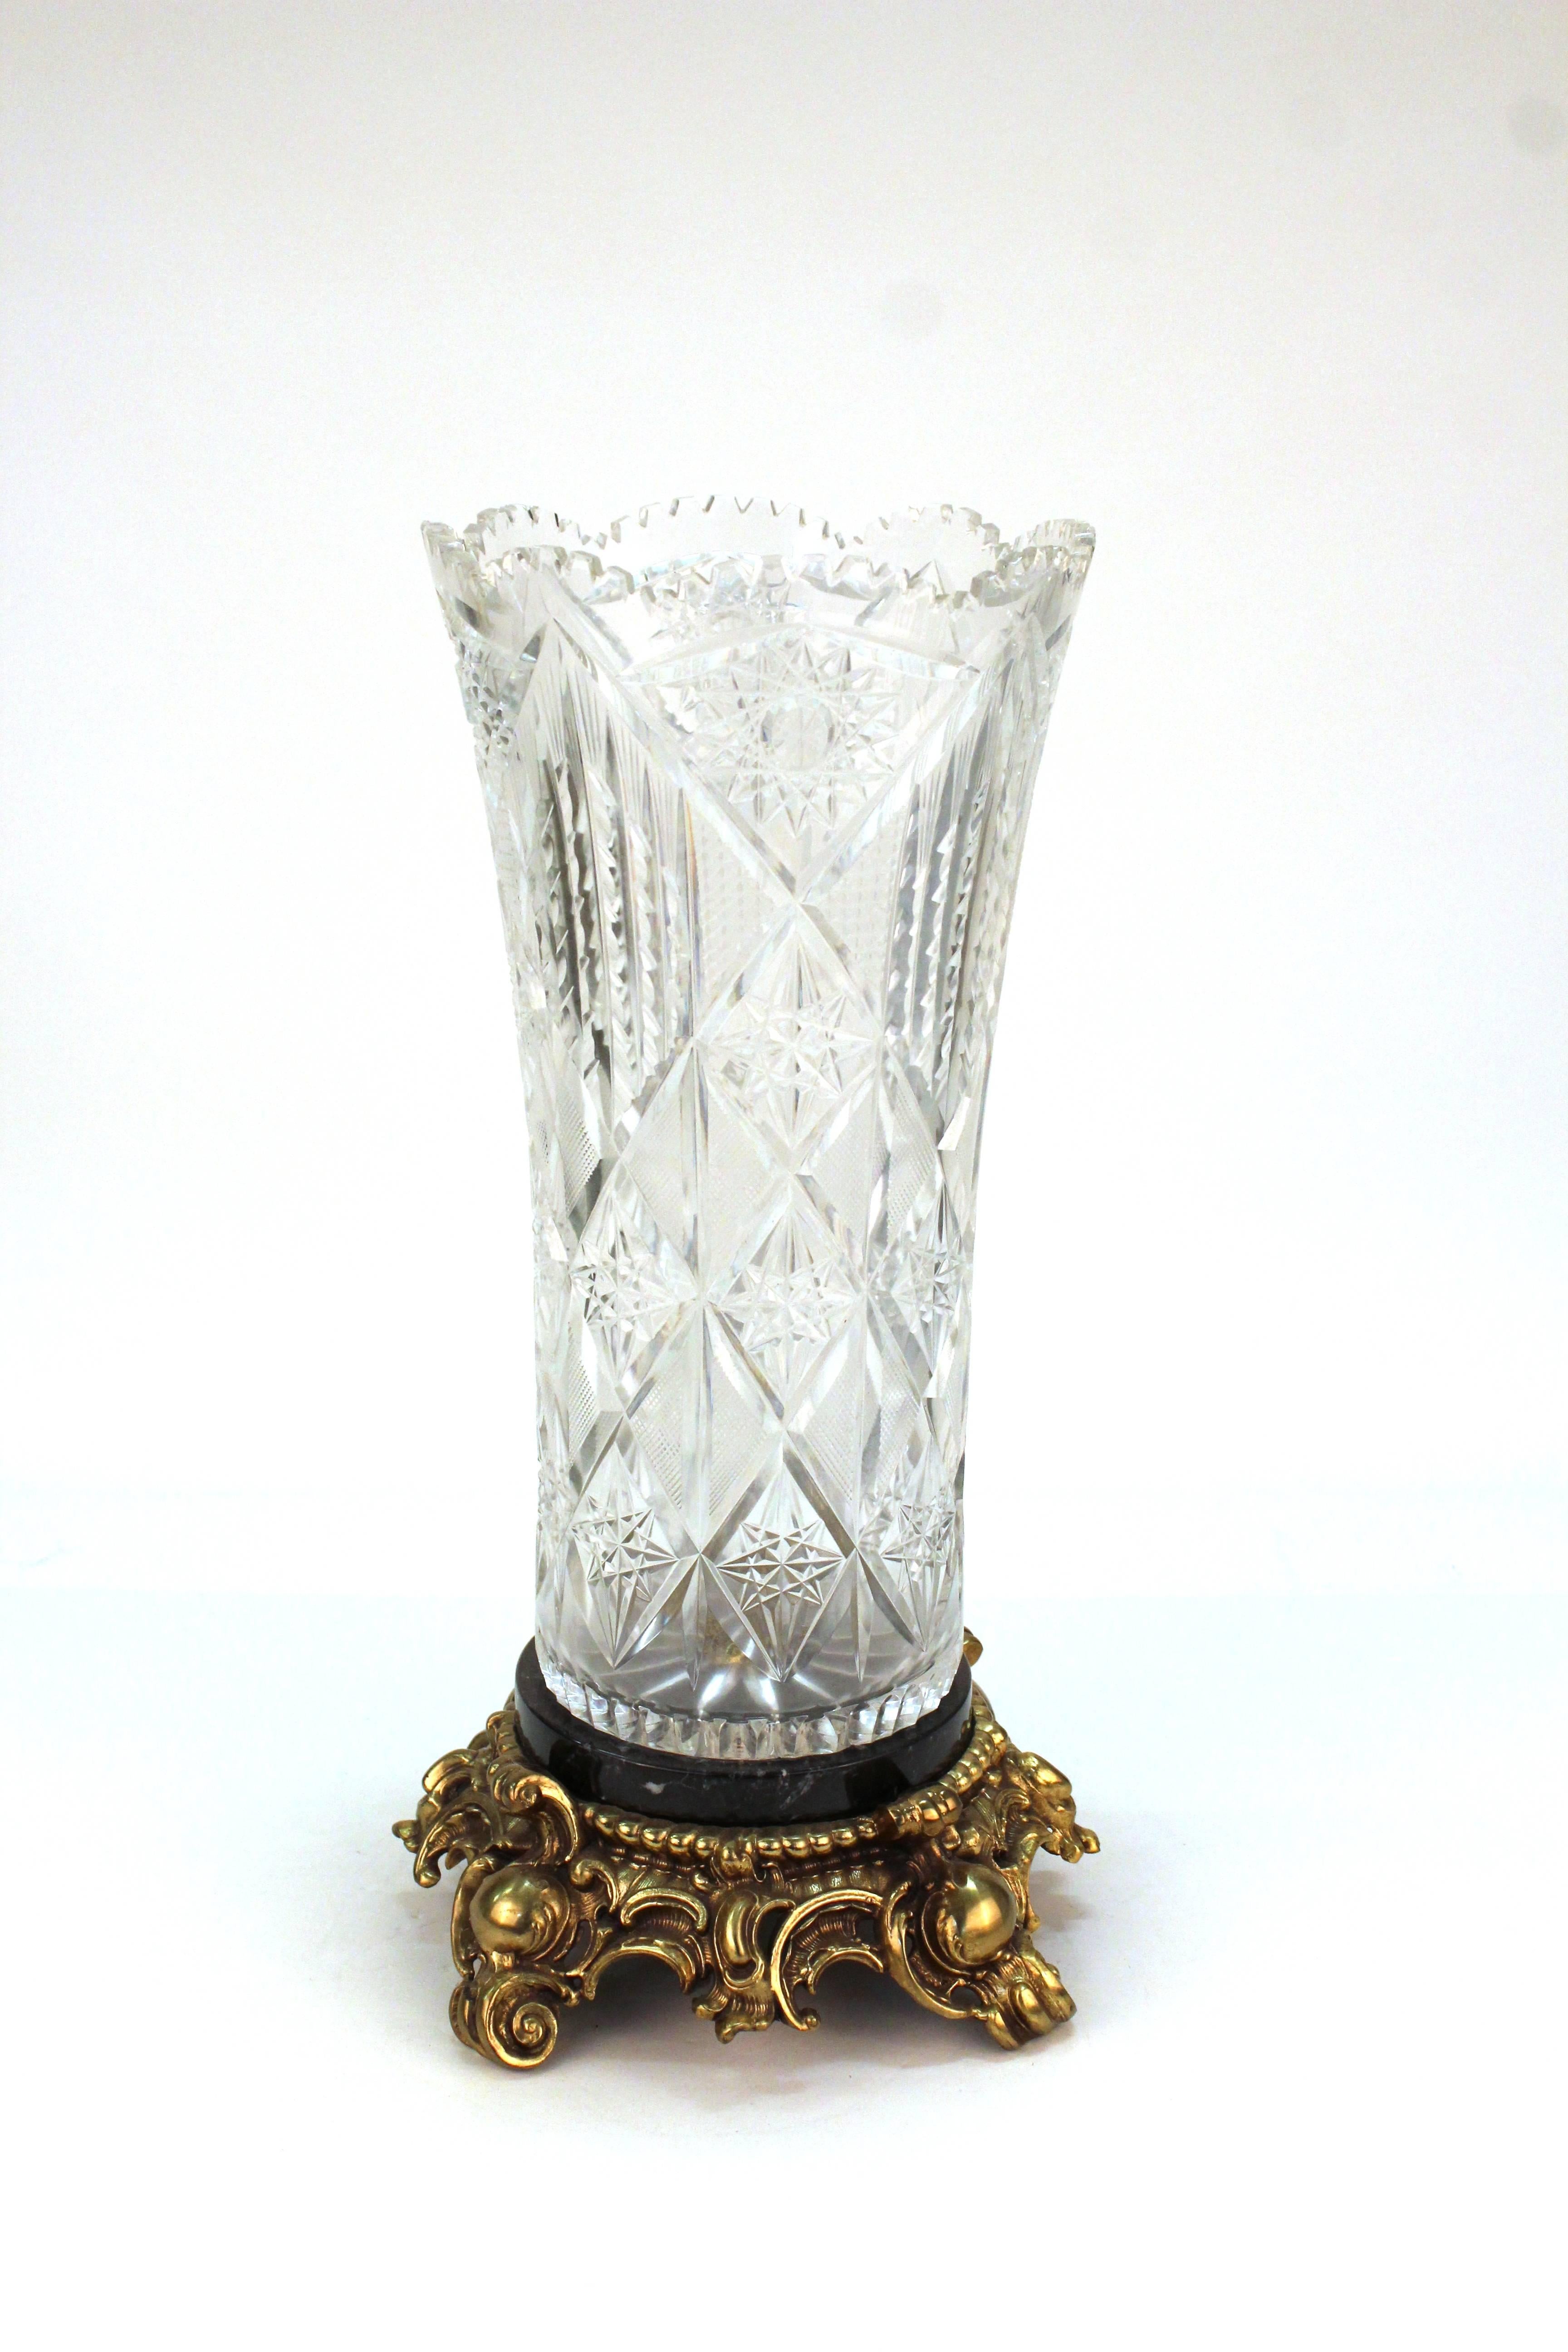 20th Century Victorian Cut Crystal Vase on Marble and Gilt Metal Base